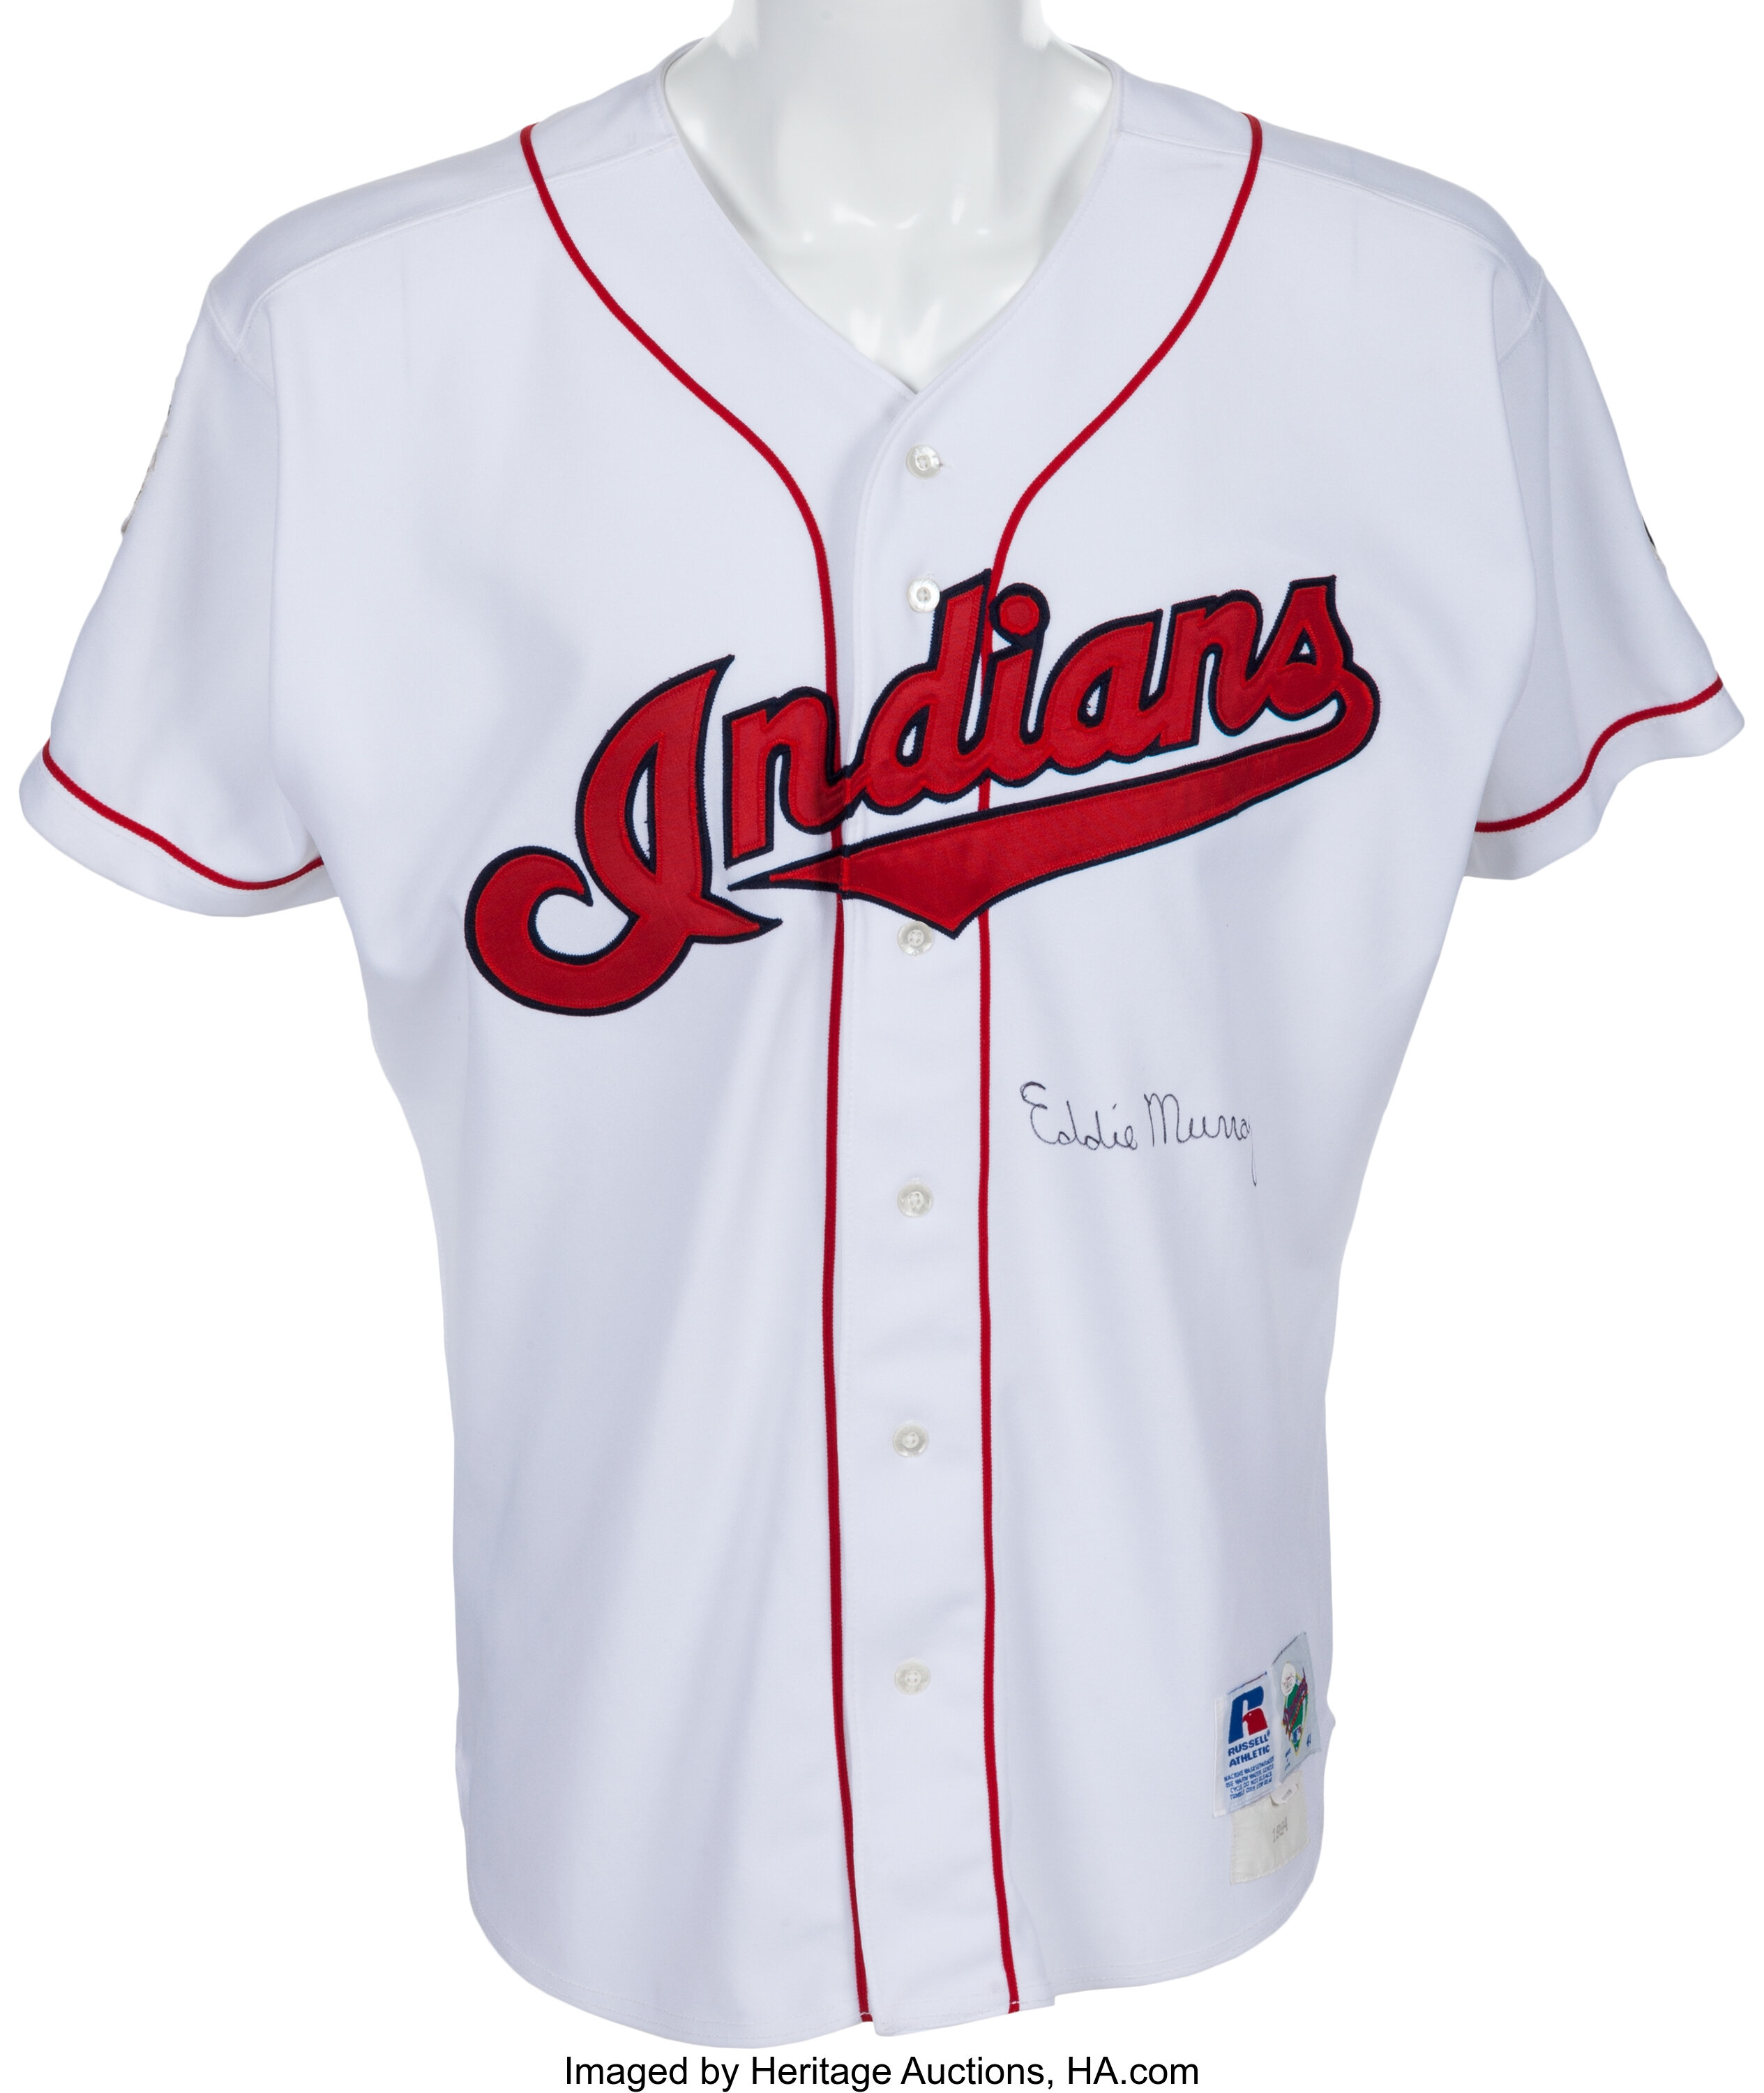 Vintage Cleveland Indians Russell Athletic Baseball Jersey, Size